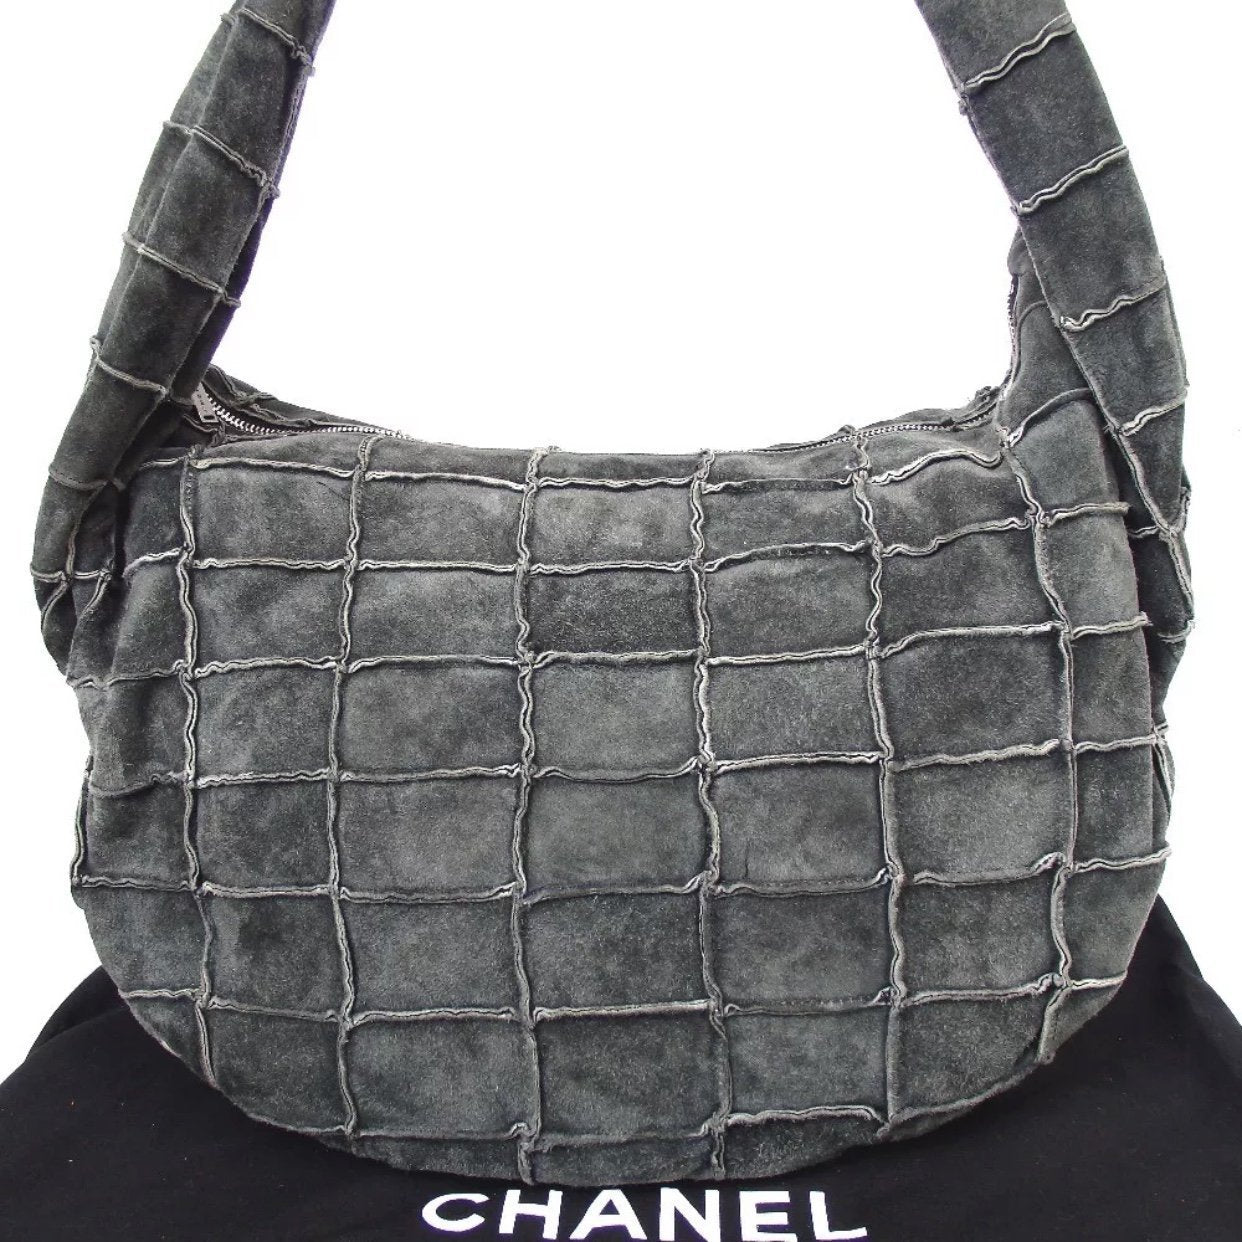 Chanel Vintage Patchwork Small Classic Flap Bag